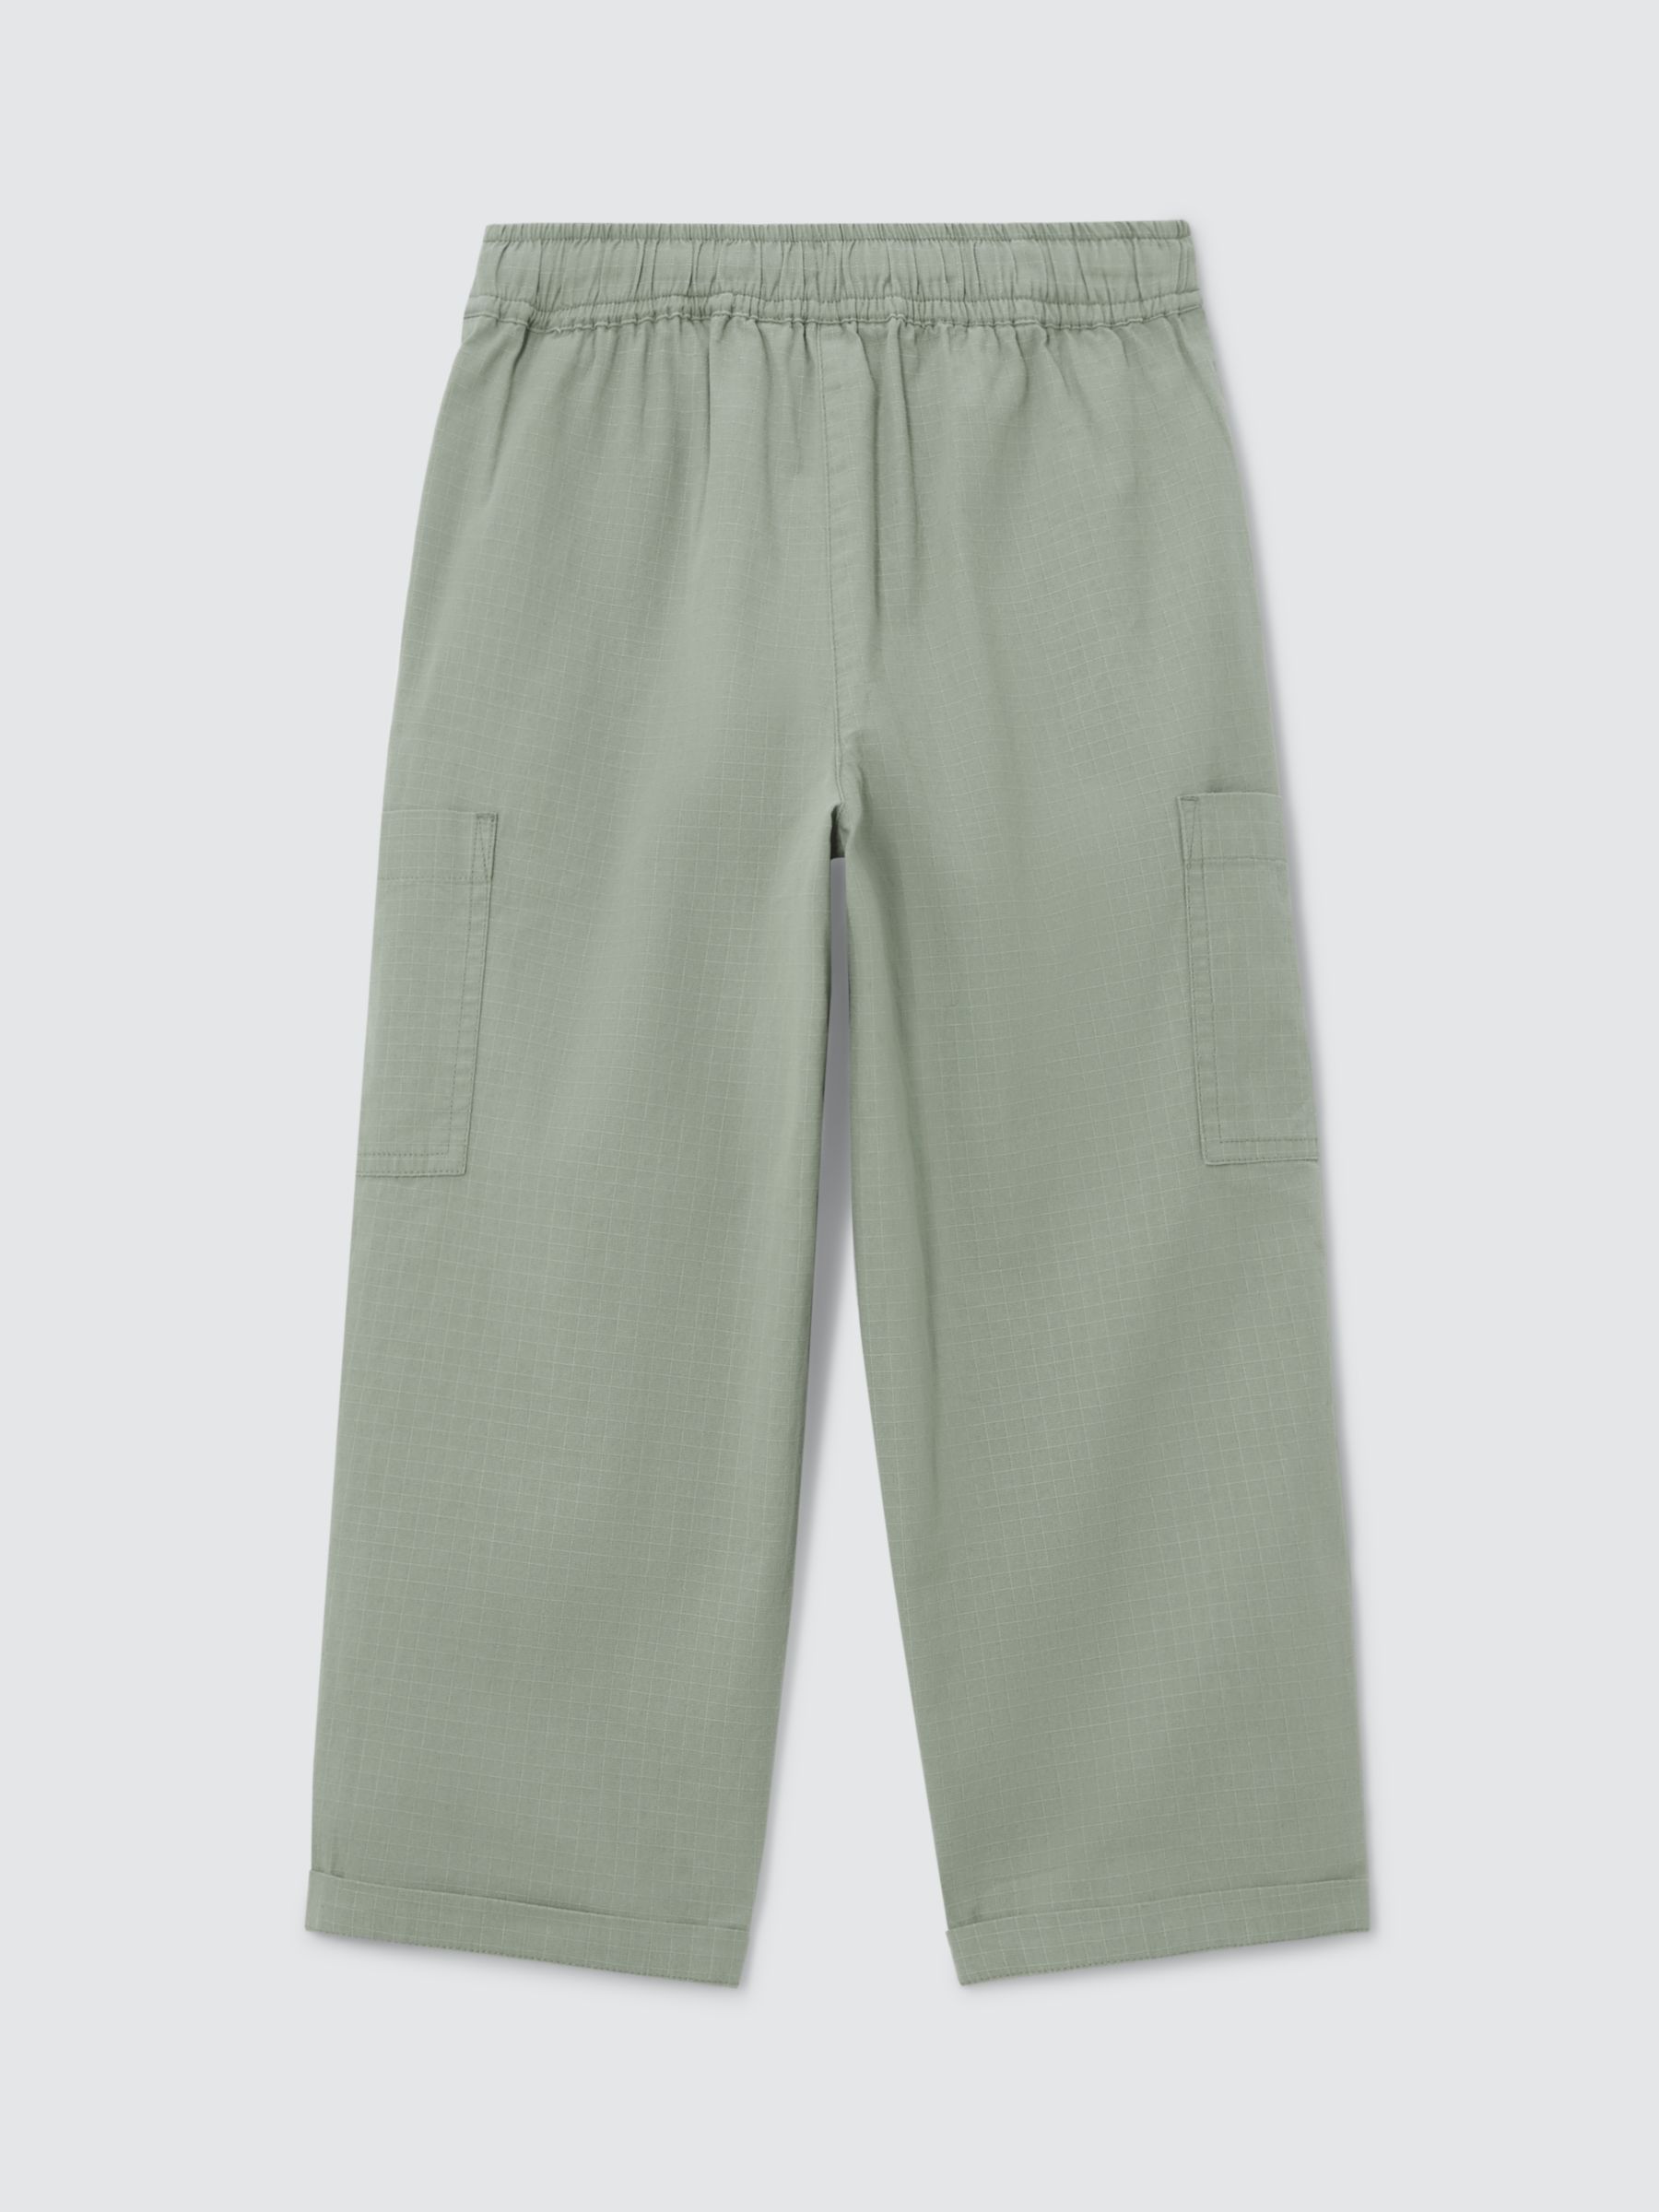 John Lewis ANYDAY Kids' Ripstop Cotton Trousers, Iceberg Green, 2 years